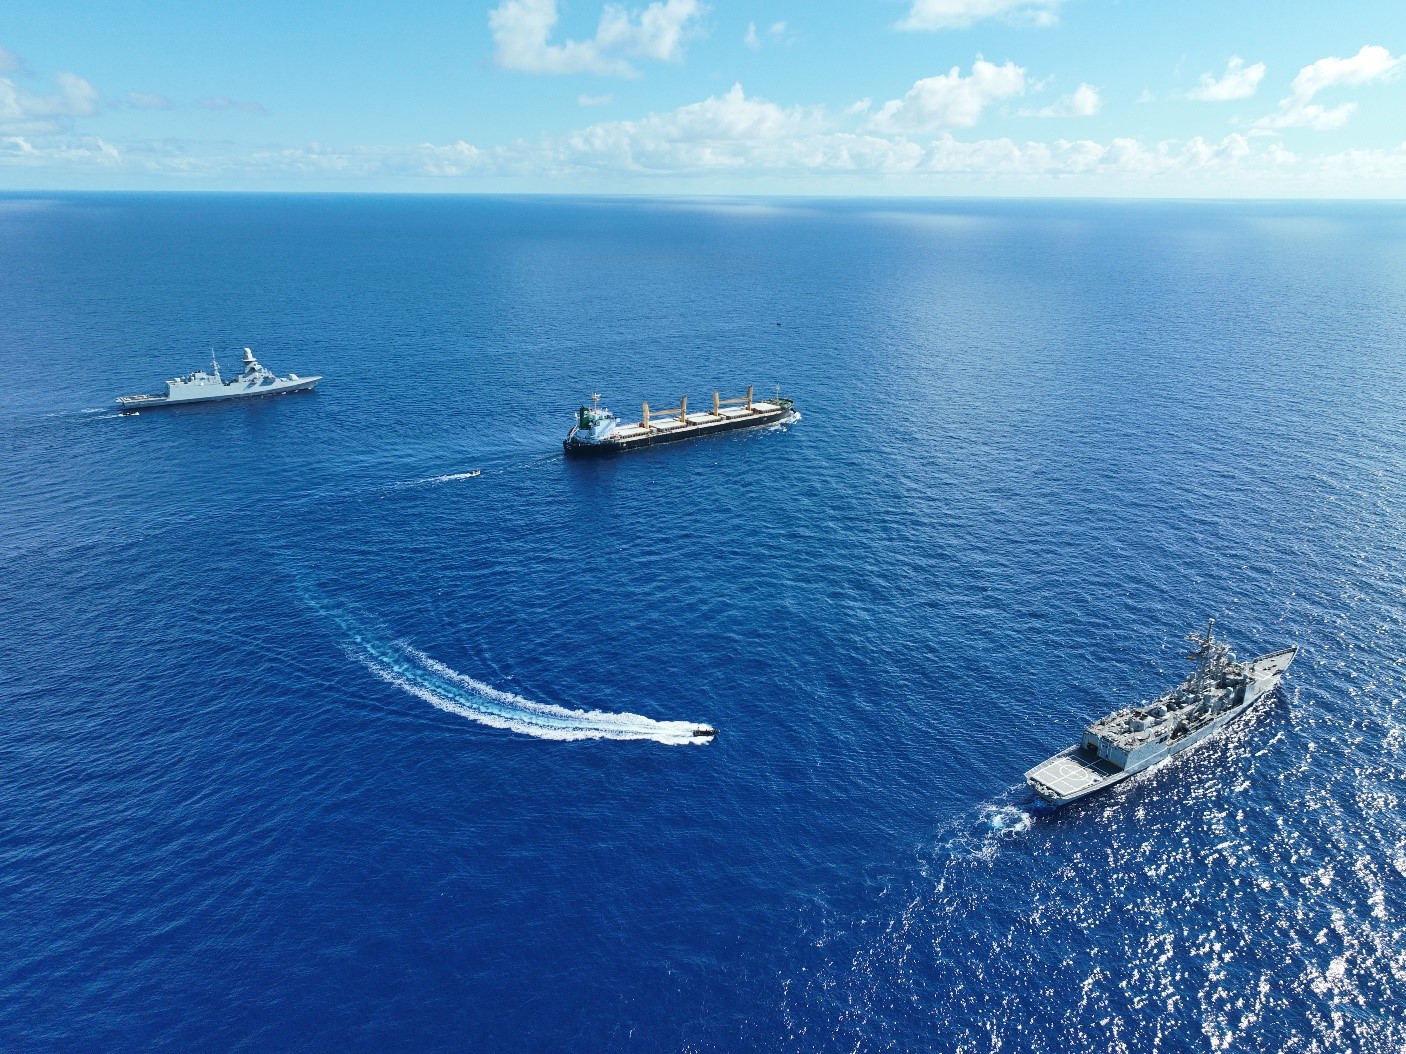 The merchant ship 'Abdullah' is assisted by the frigates 'Canarias' and 'Martinengo'